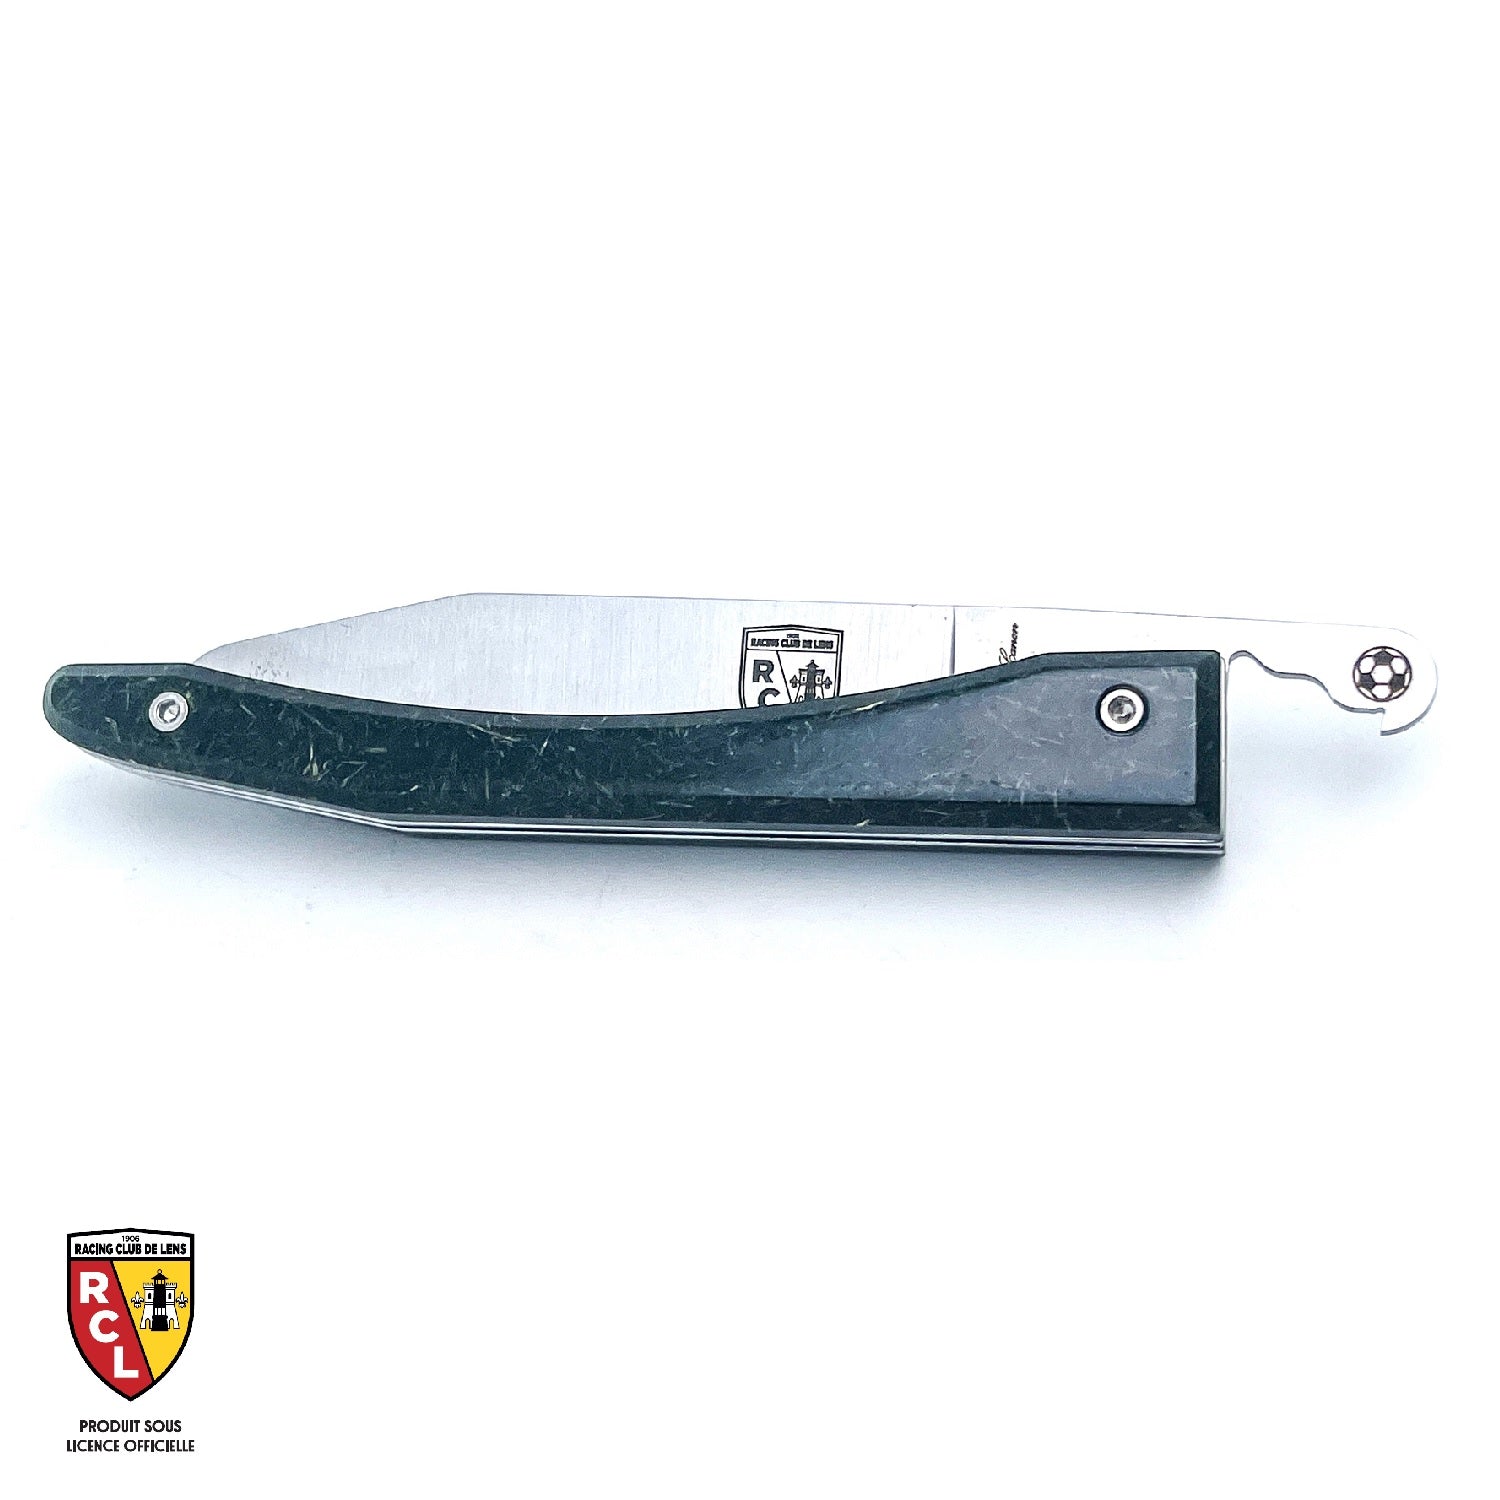 RC LENS Piedmontese knife with its grass handle from the Bollaert-Delelis stadium (UNDER OFFICIAL LICENSE)